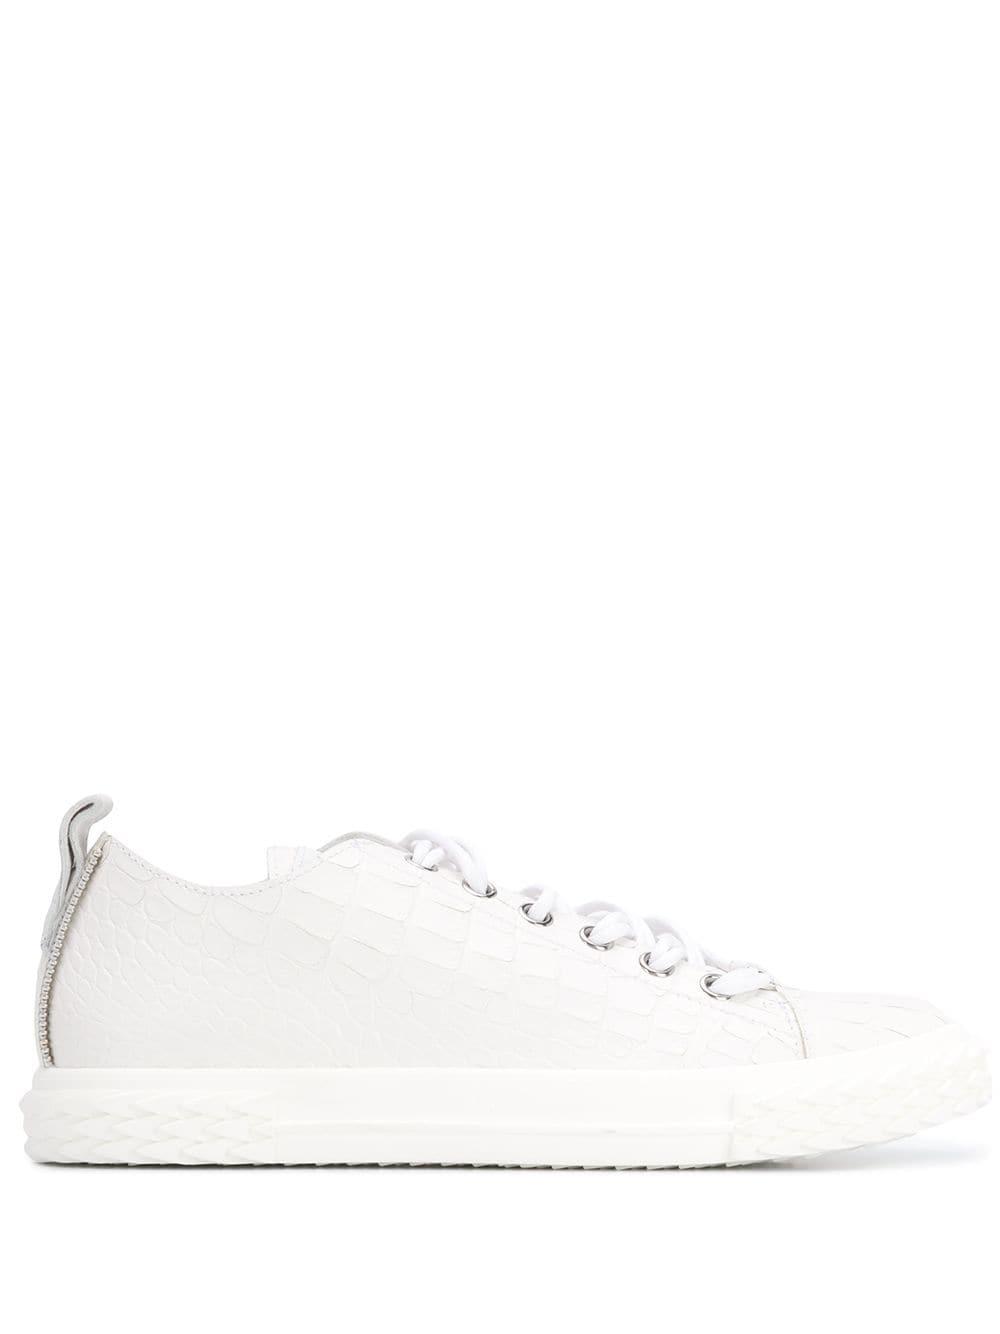 Giuseppe Zanotti Blabber Leather Trainers in White for Men - Save 67% - Lyst